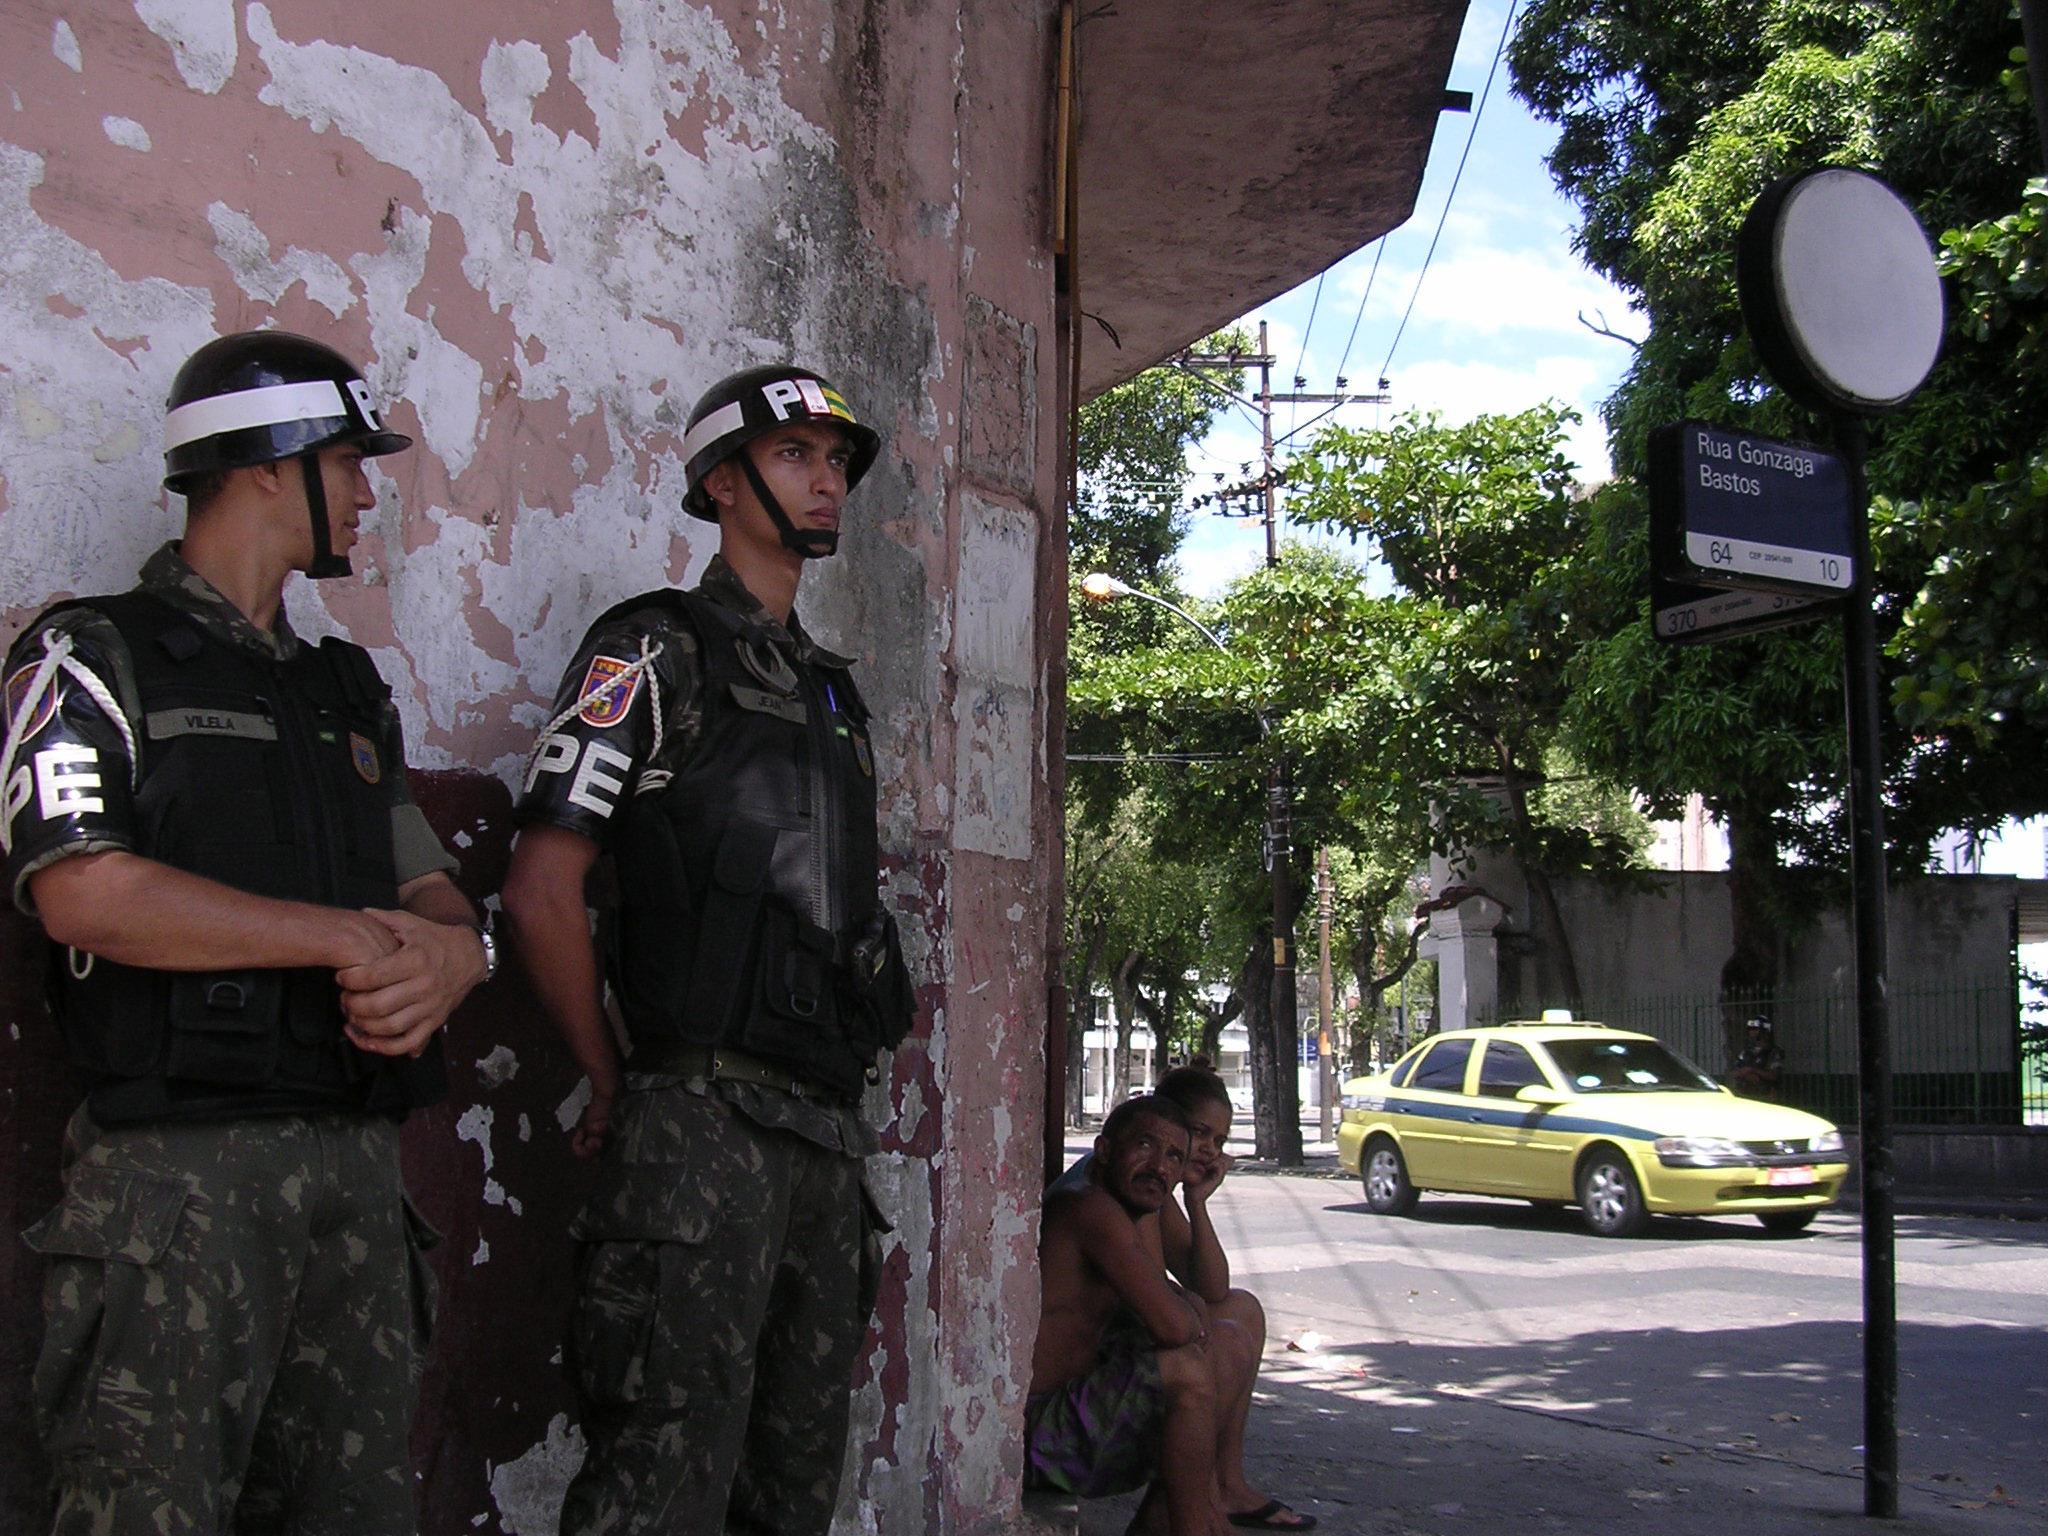 Tijuca Street Robberies on the Rise: Daily